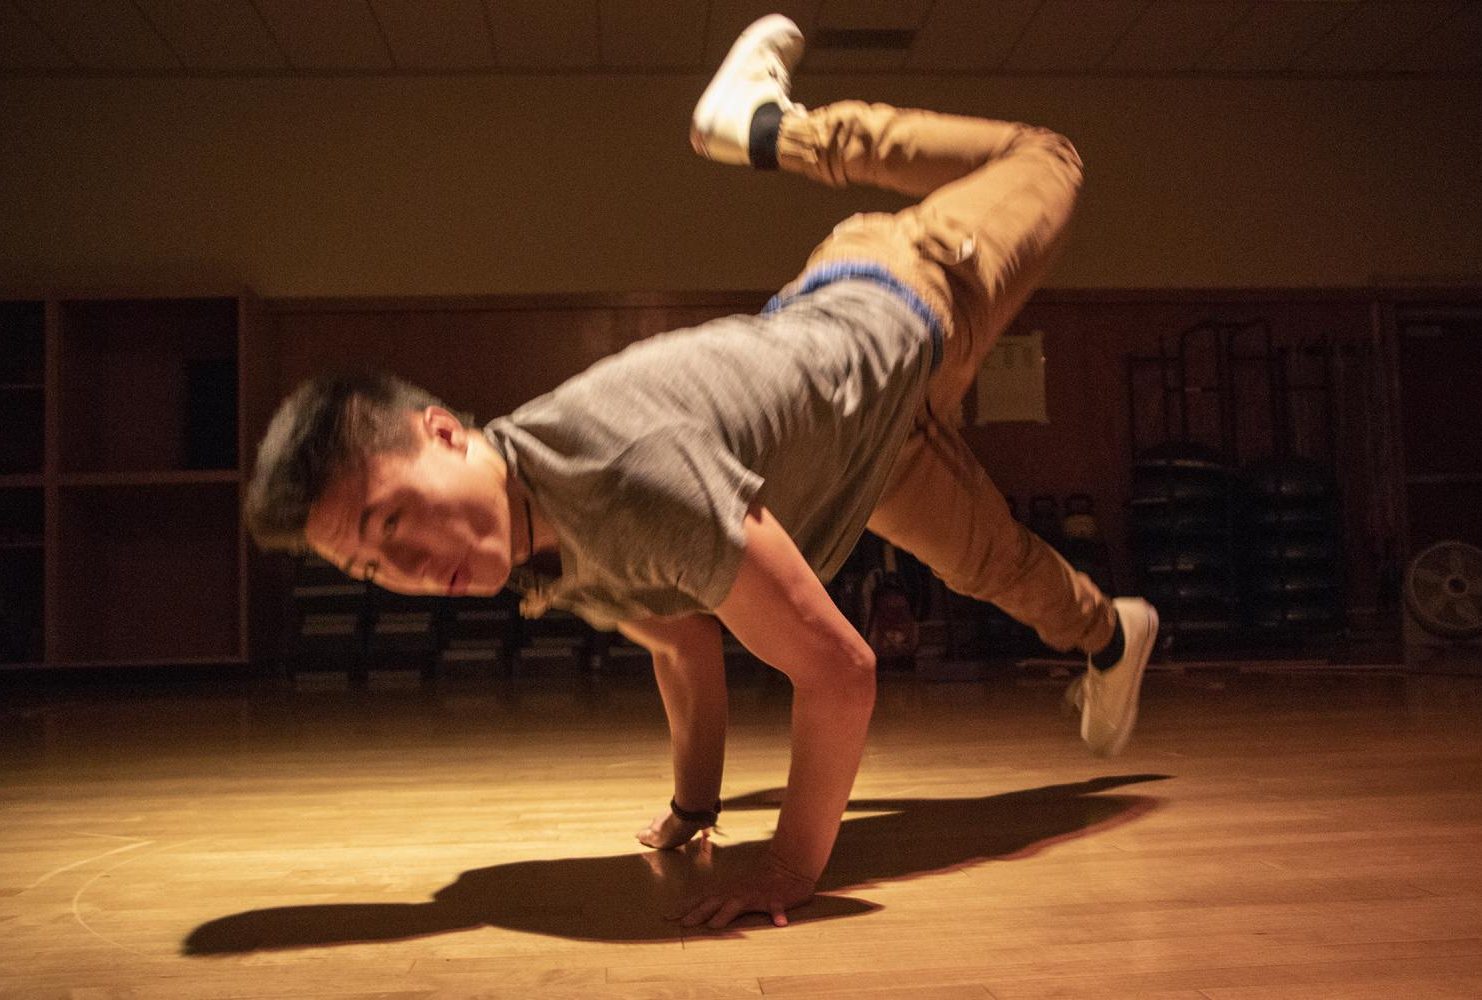 Dance major, Jeremy Xiong break-dances in a dance studio at American River College during the Dance Production: Studio and Stage class, on Feb. 6, 2019. He describes himself as a b-boy. (Photo by Ashley Hayes-Stone)